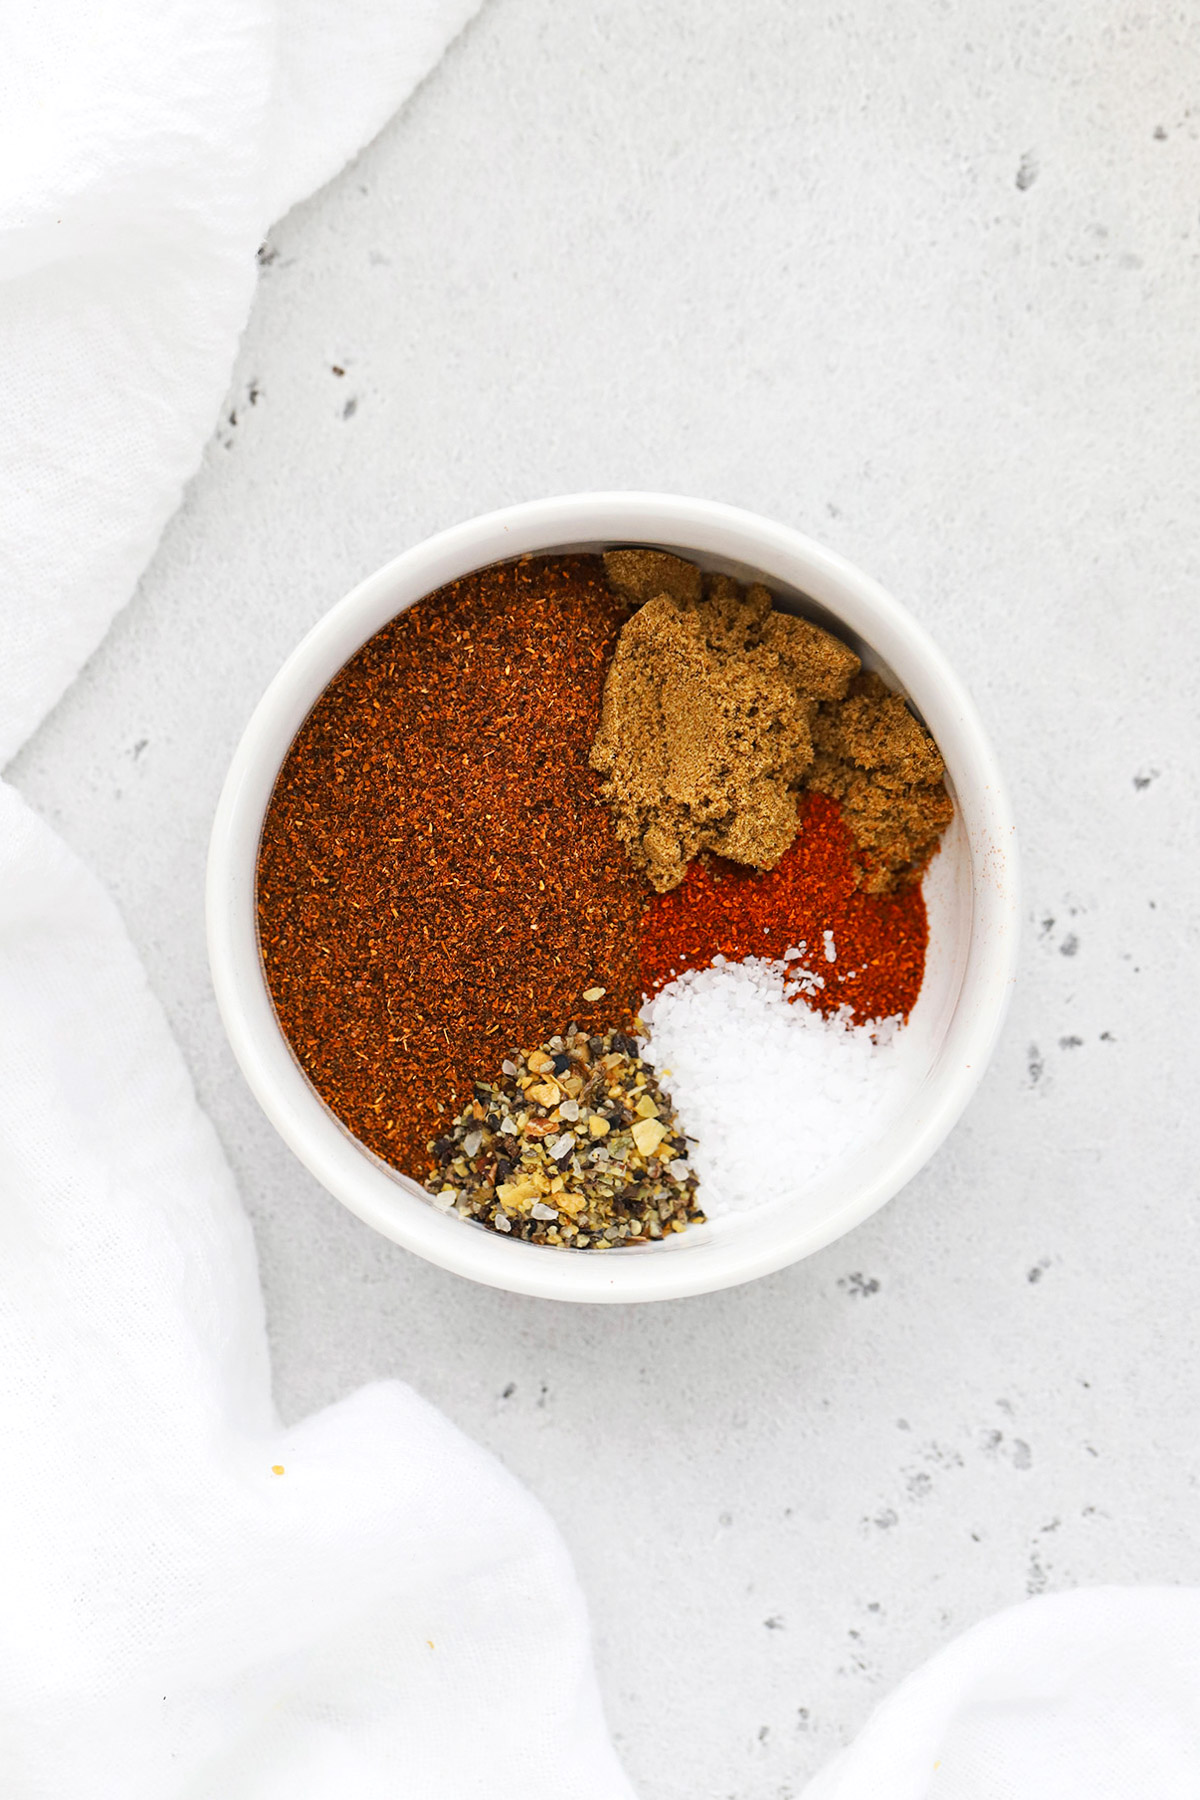 Overhead view of a bowl of chili seasoning for making ground chicken chili